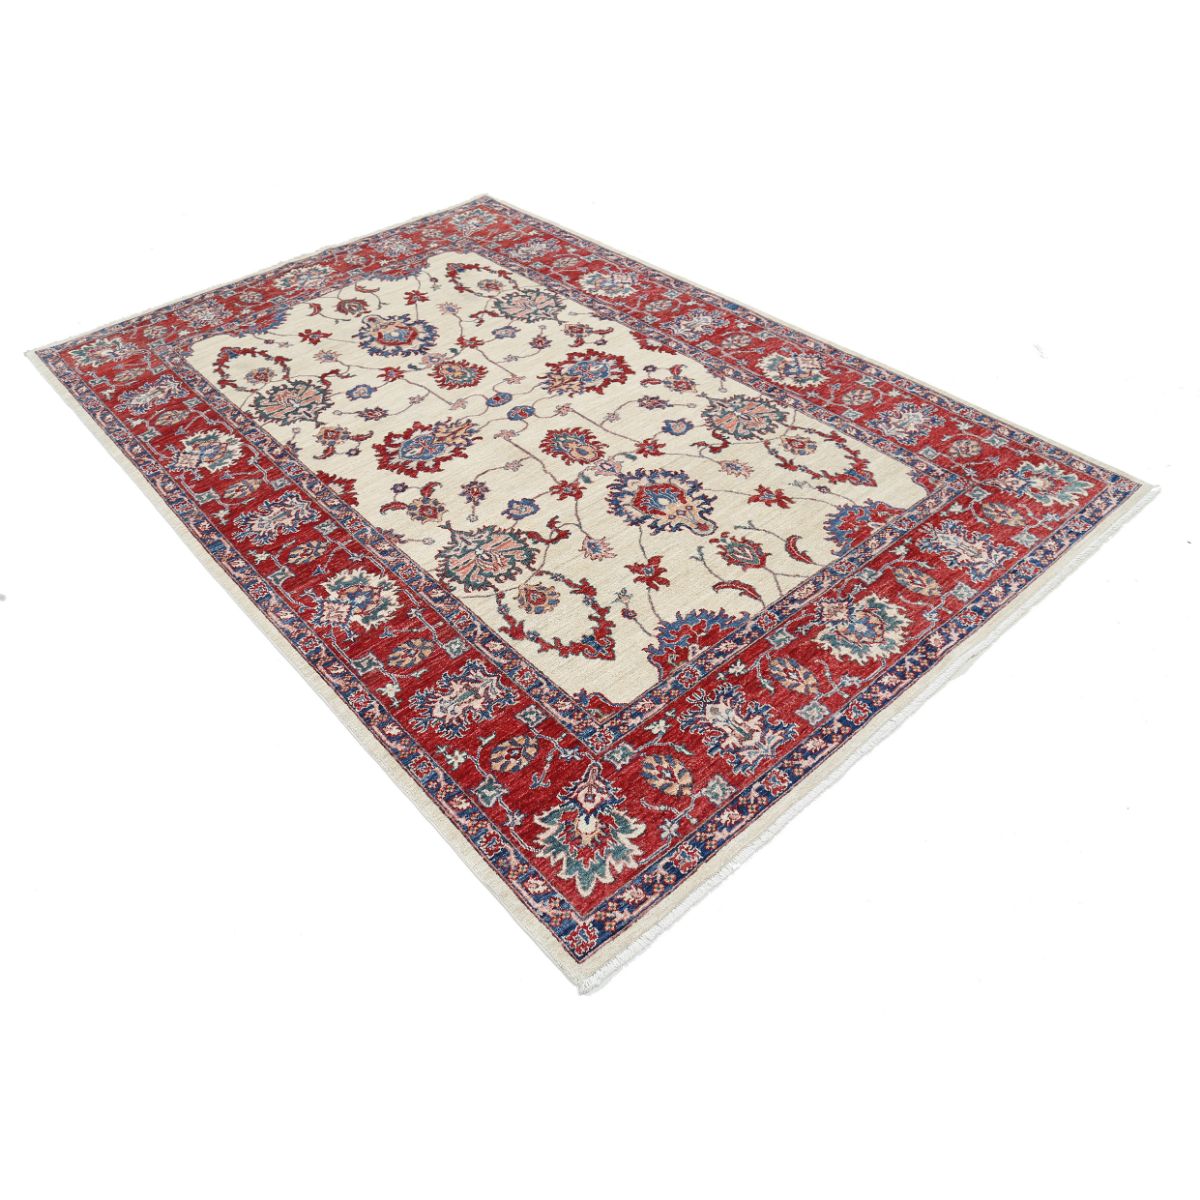 Ziegler 5'11" X 8'8" Wool Hand-Knotted Rug